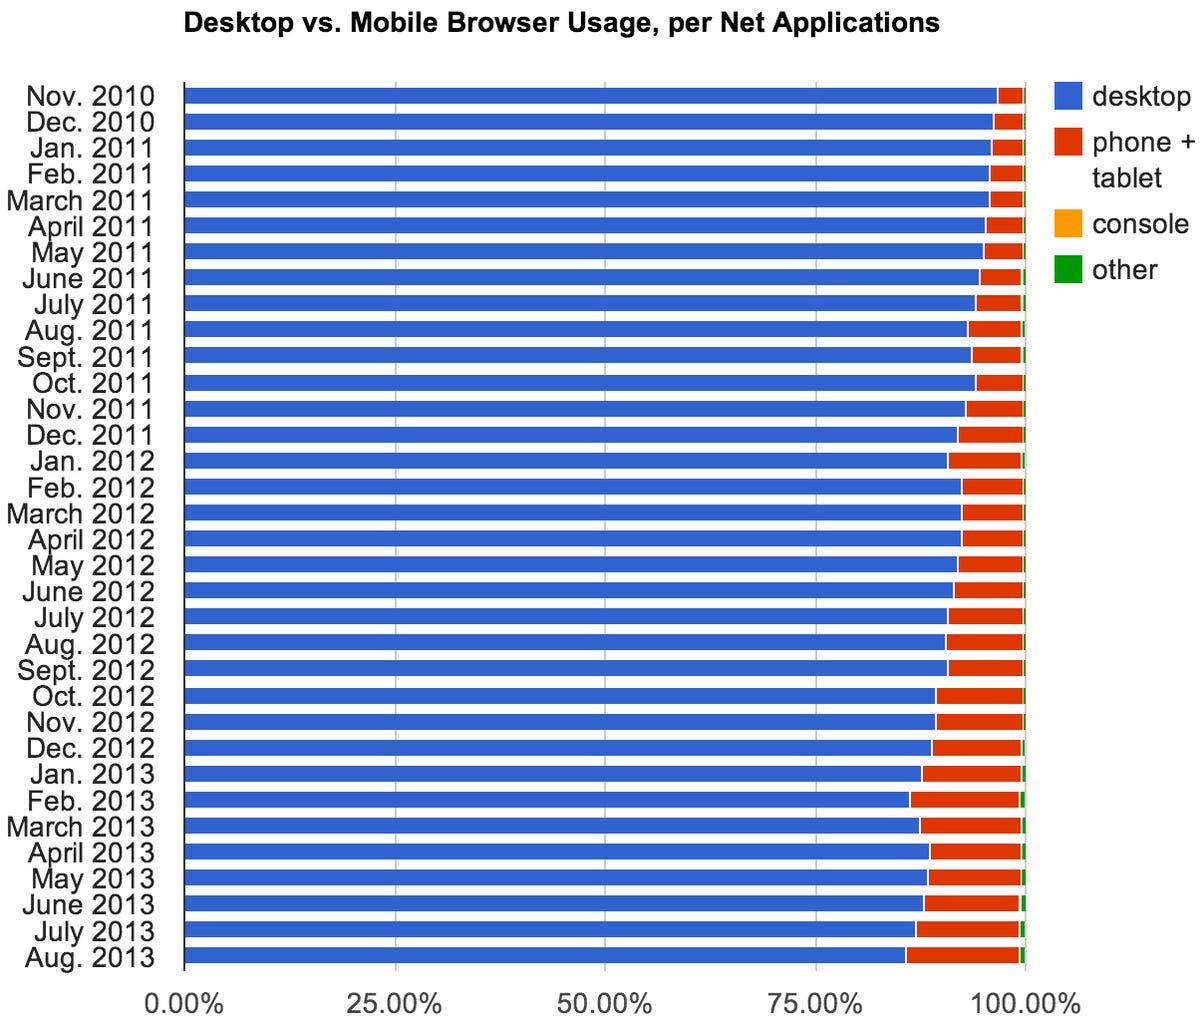 Mobile browsing reached its highest ever level in August 2013 compared to PC browsing, according to Net Applications.